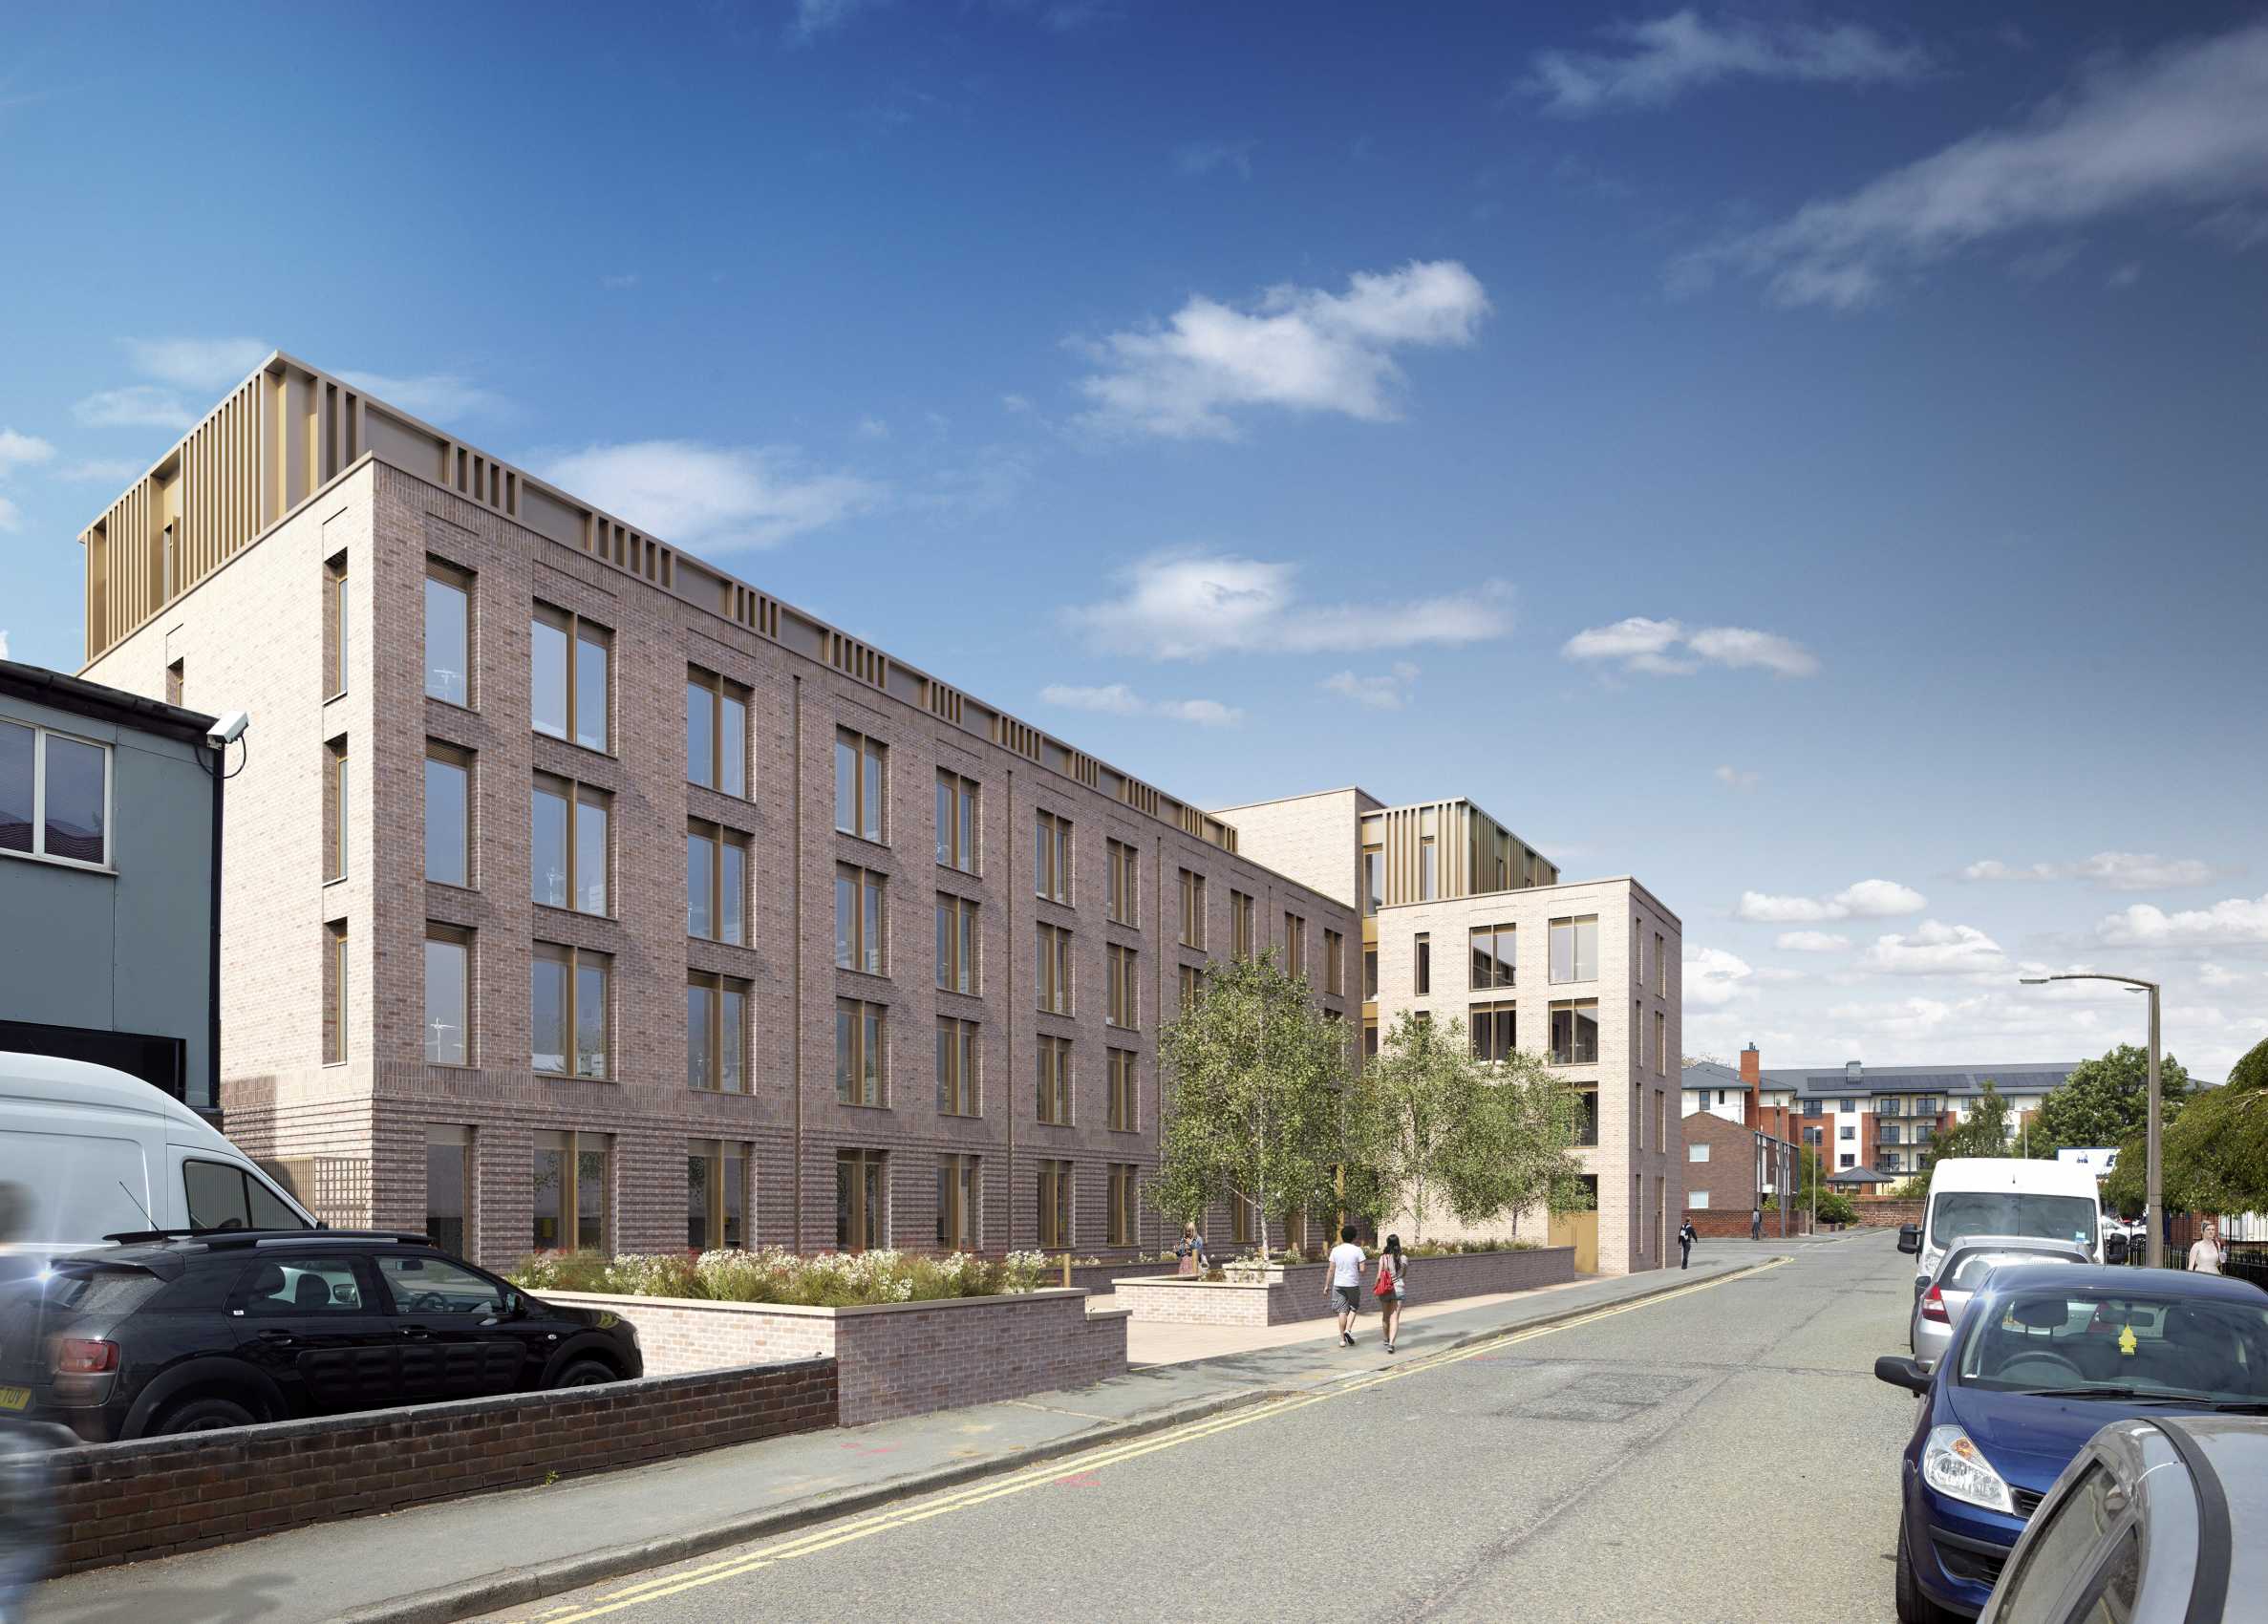 Luxury student accommodation near Liverpool and Manchester1 - Stonehard